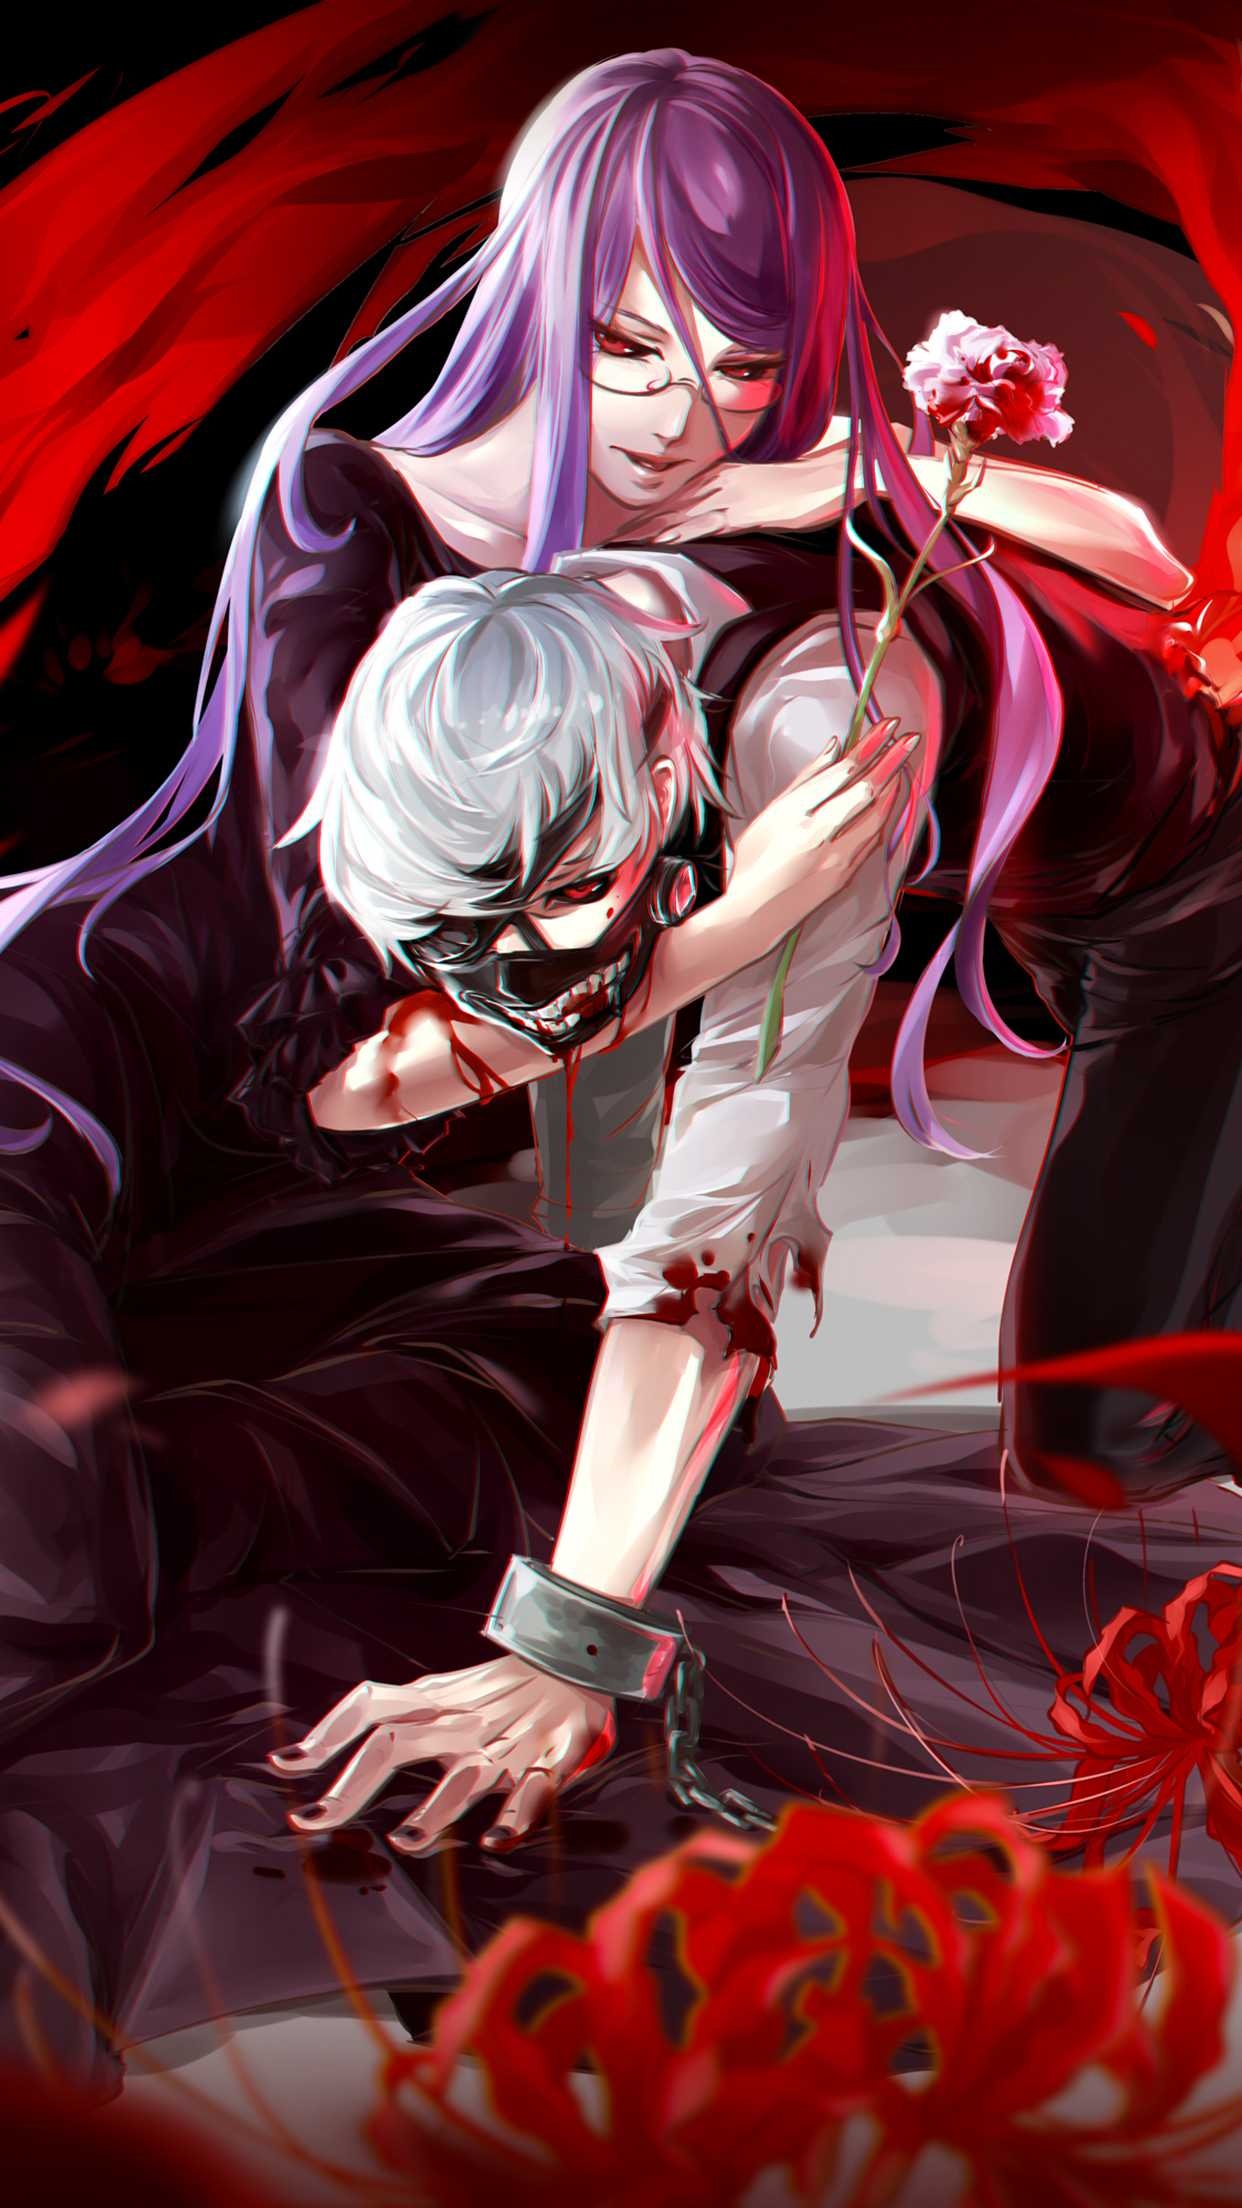 Tokyo Ghoul, High-definition wallpapers, Anime obsession, Dark themes, 1250x2210 HD Handy